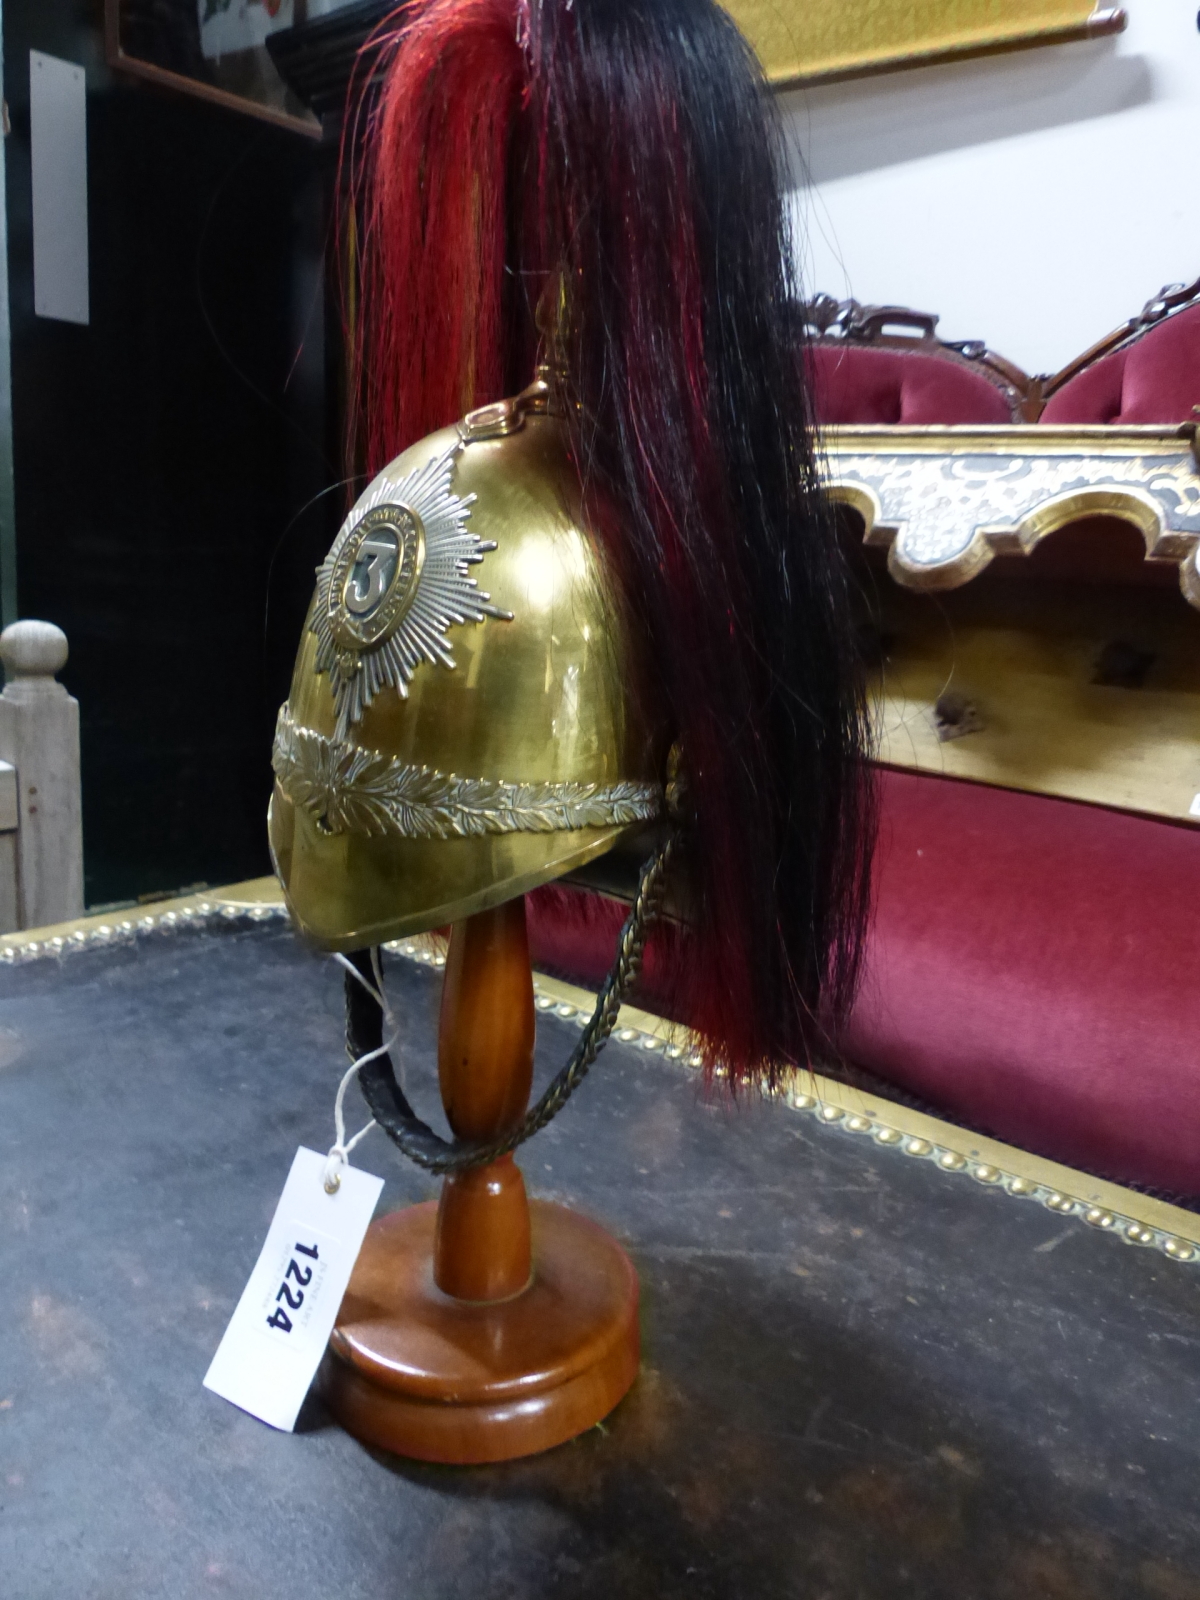 A 3RD DRAGOON GUARDS MINIATURE HELMET WITH BLACK AND RED HORSEHAIR PLUME.